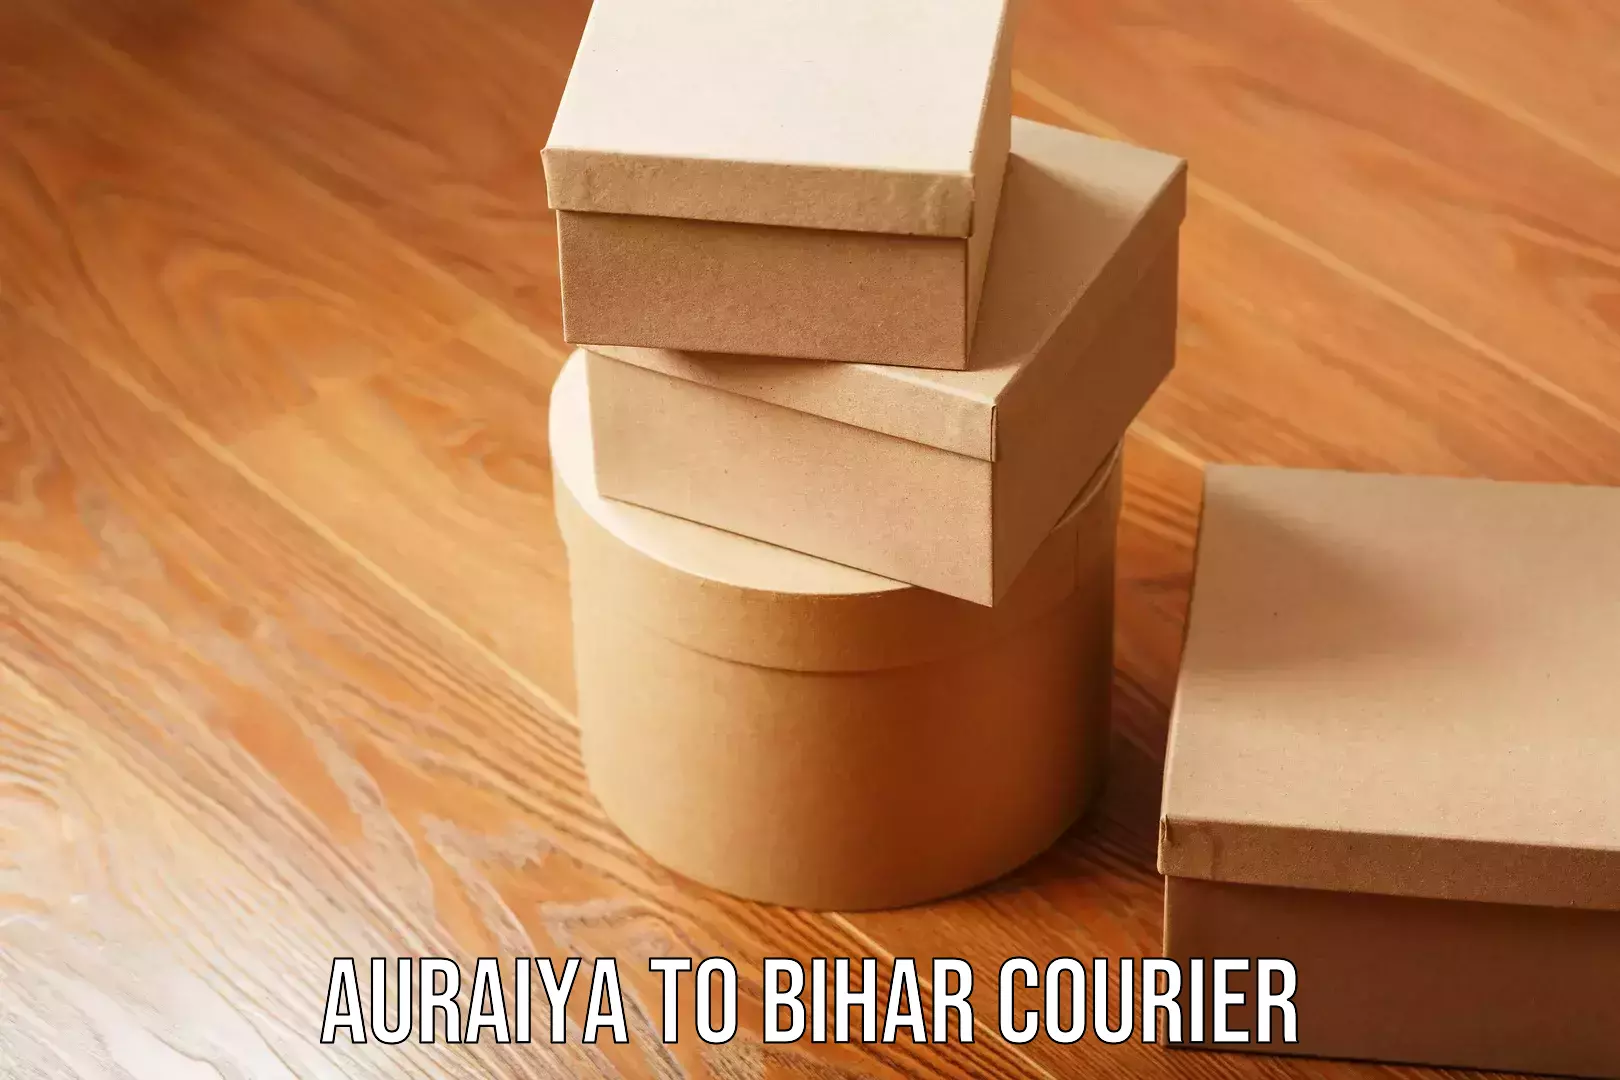 Reliable delivery network Auraiya to Bihta